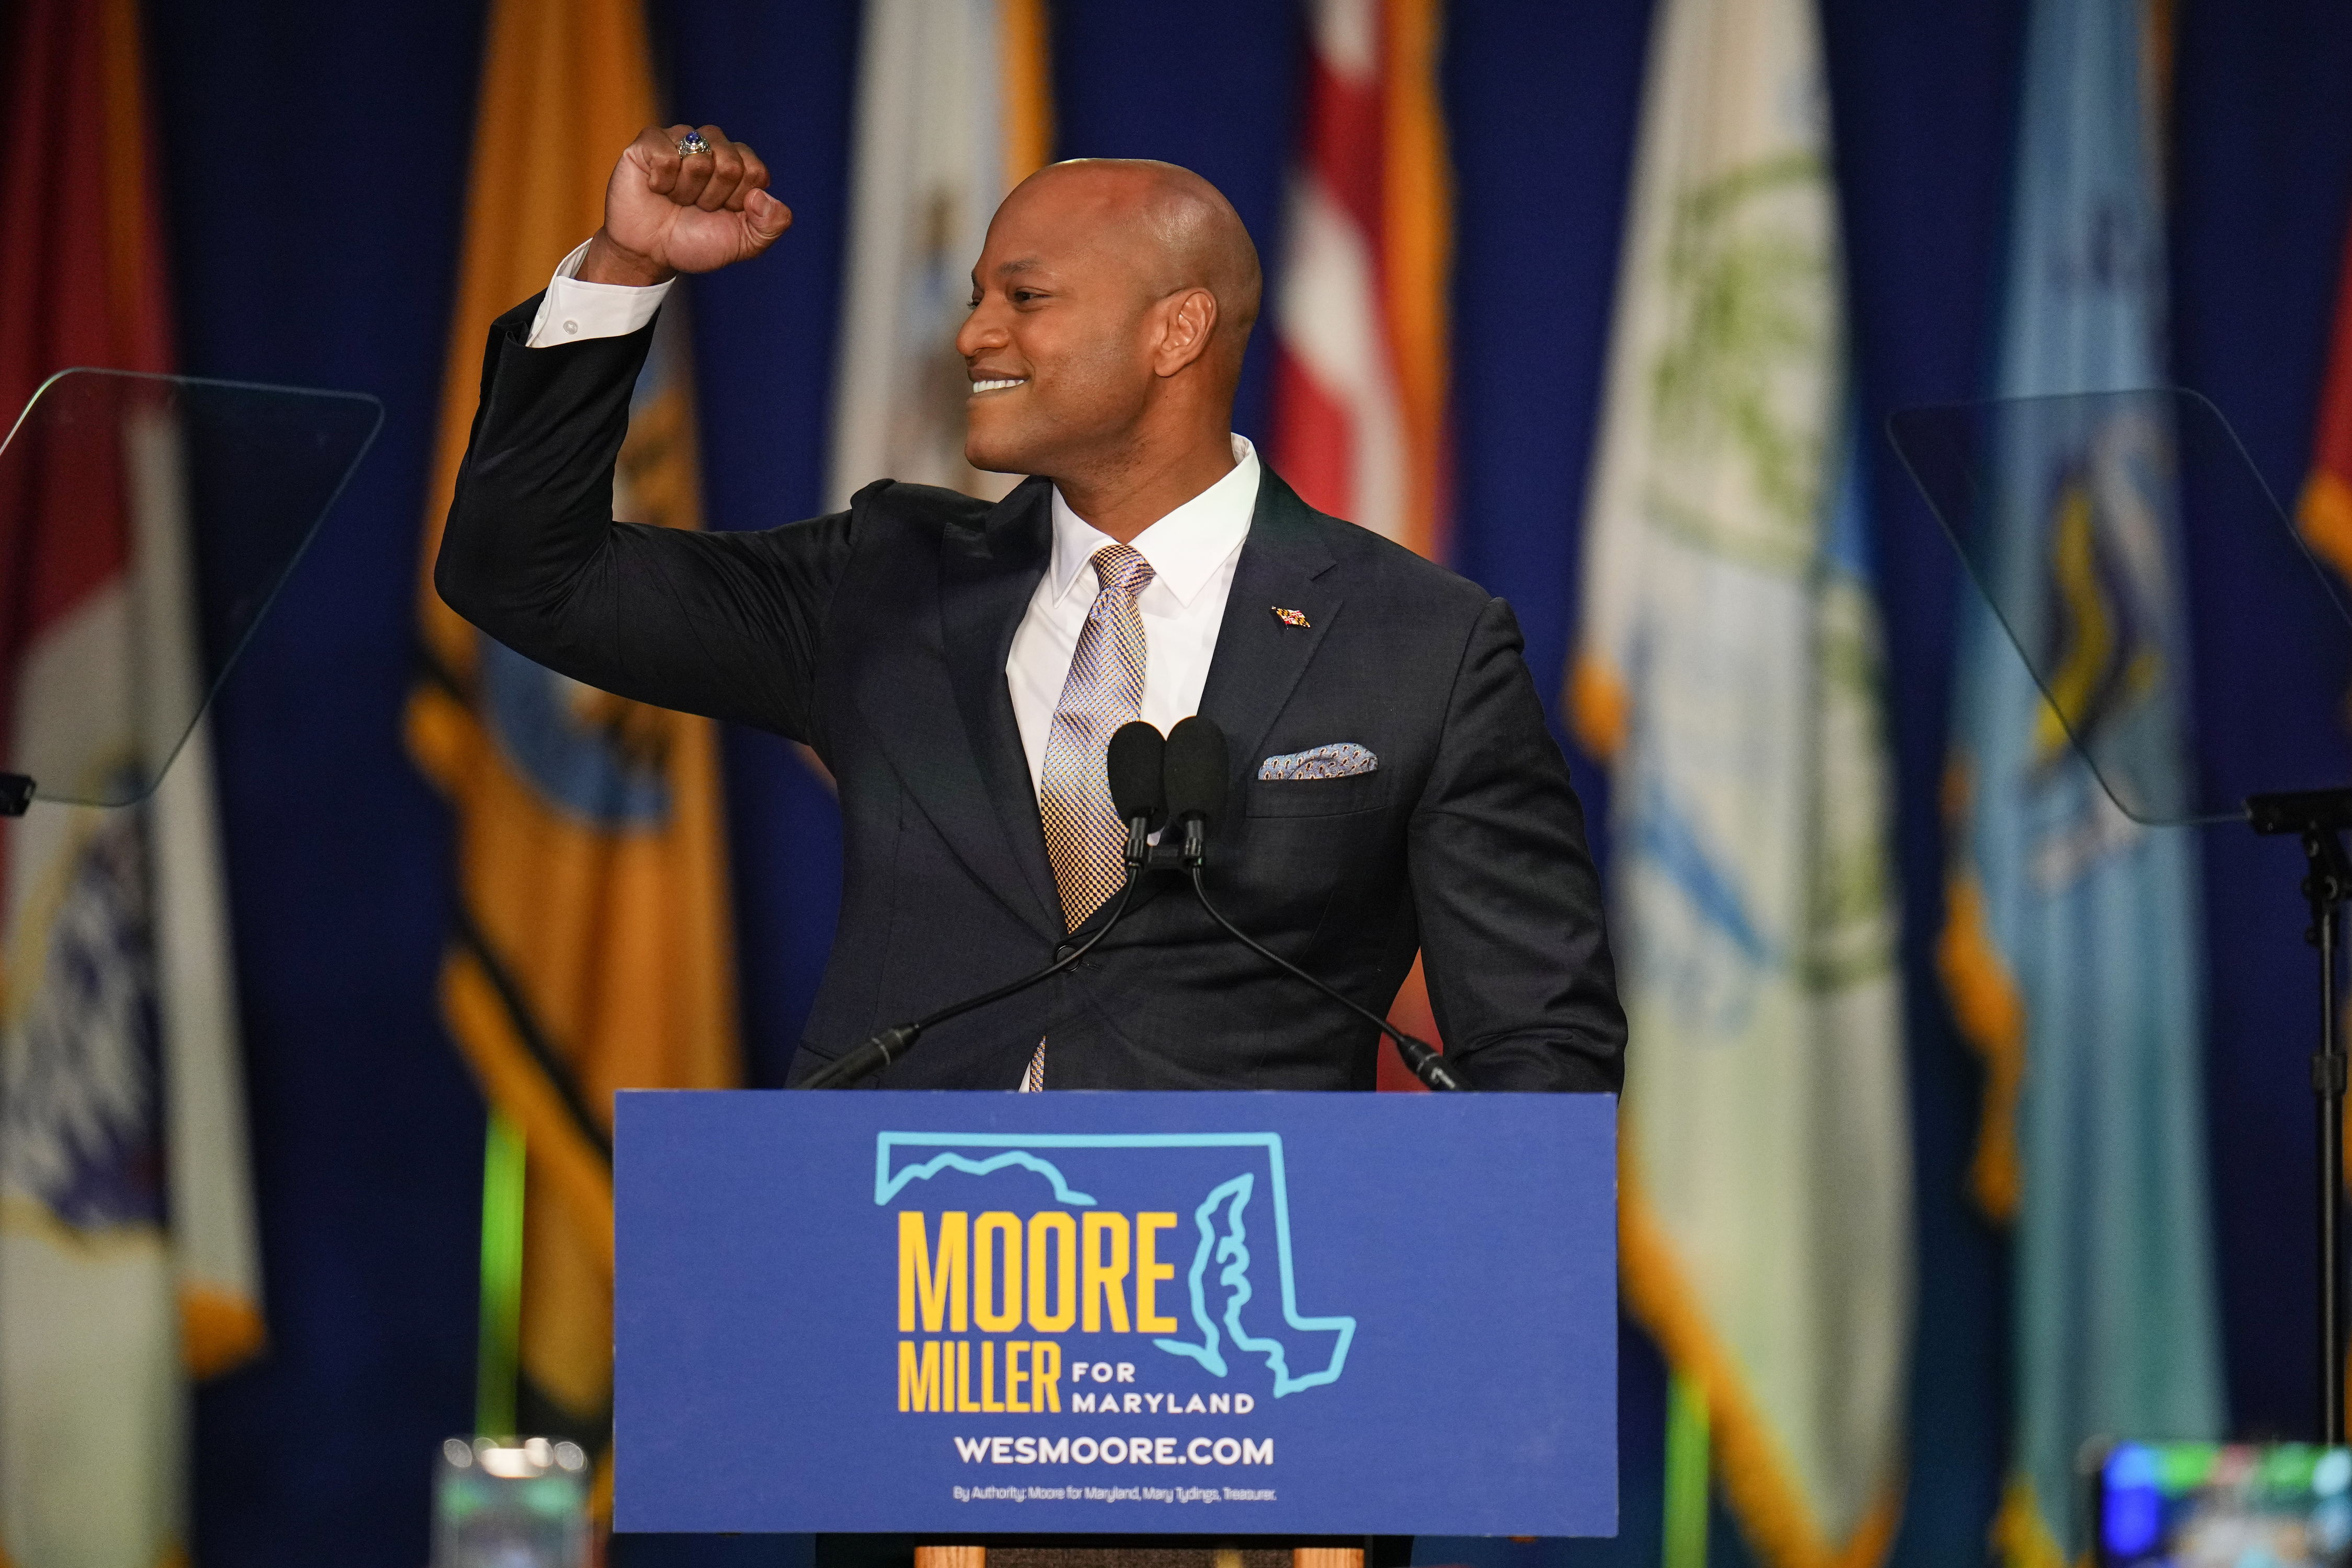 Wes Moore will become Maryland’s first Black governor